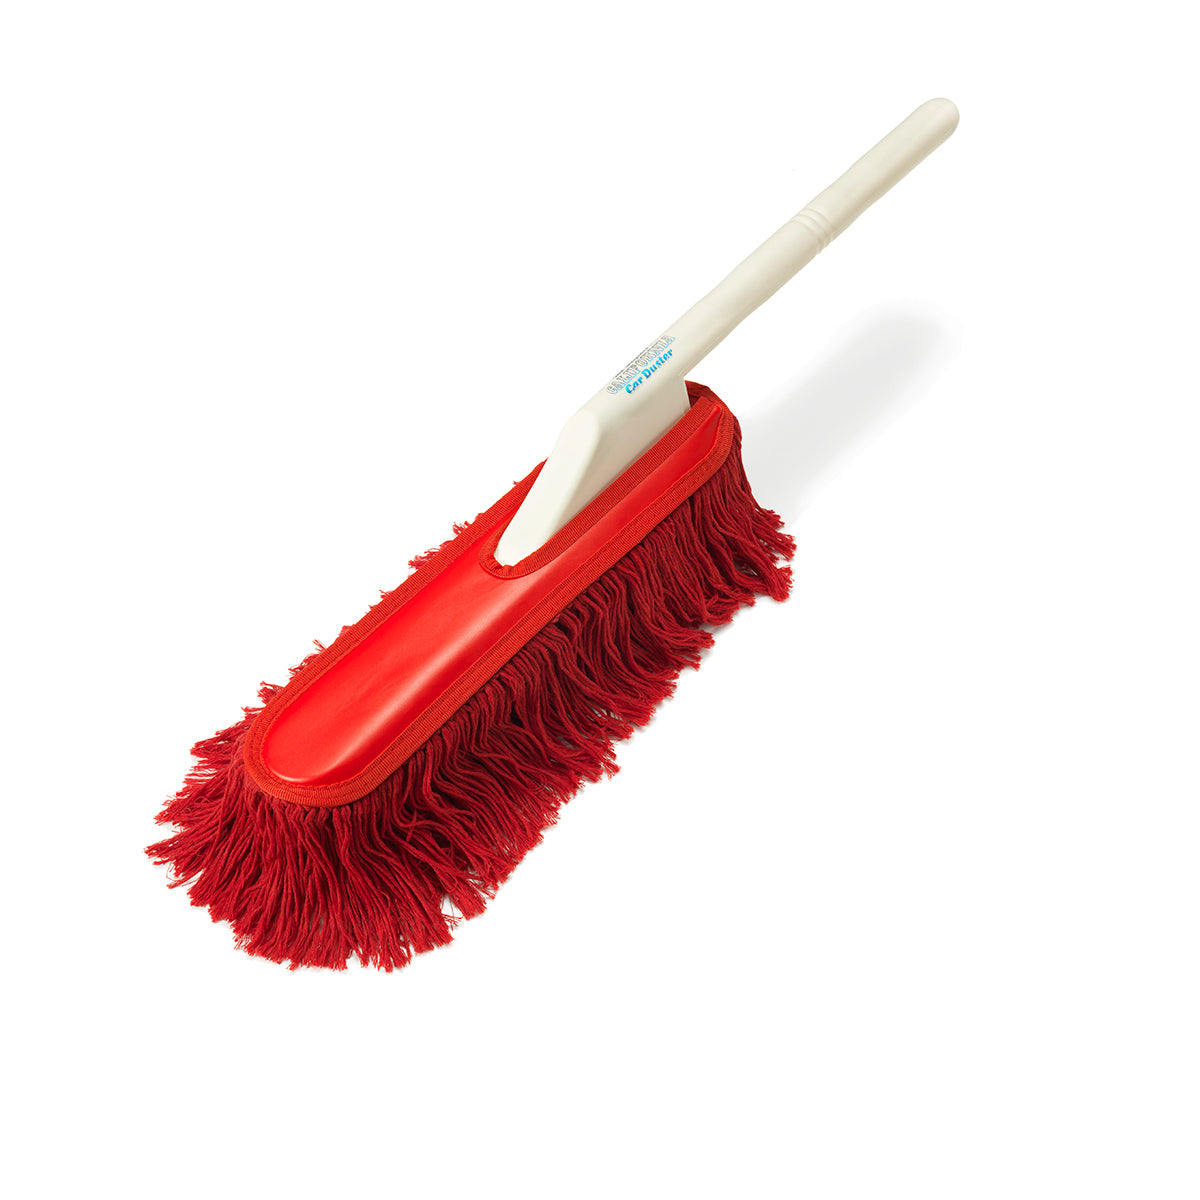 Car Duster - Car Cleaning Duster Latest Price, Manufacturers & Suppliers